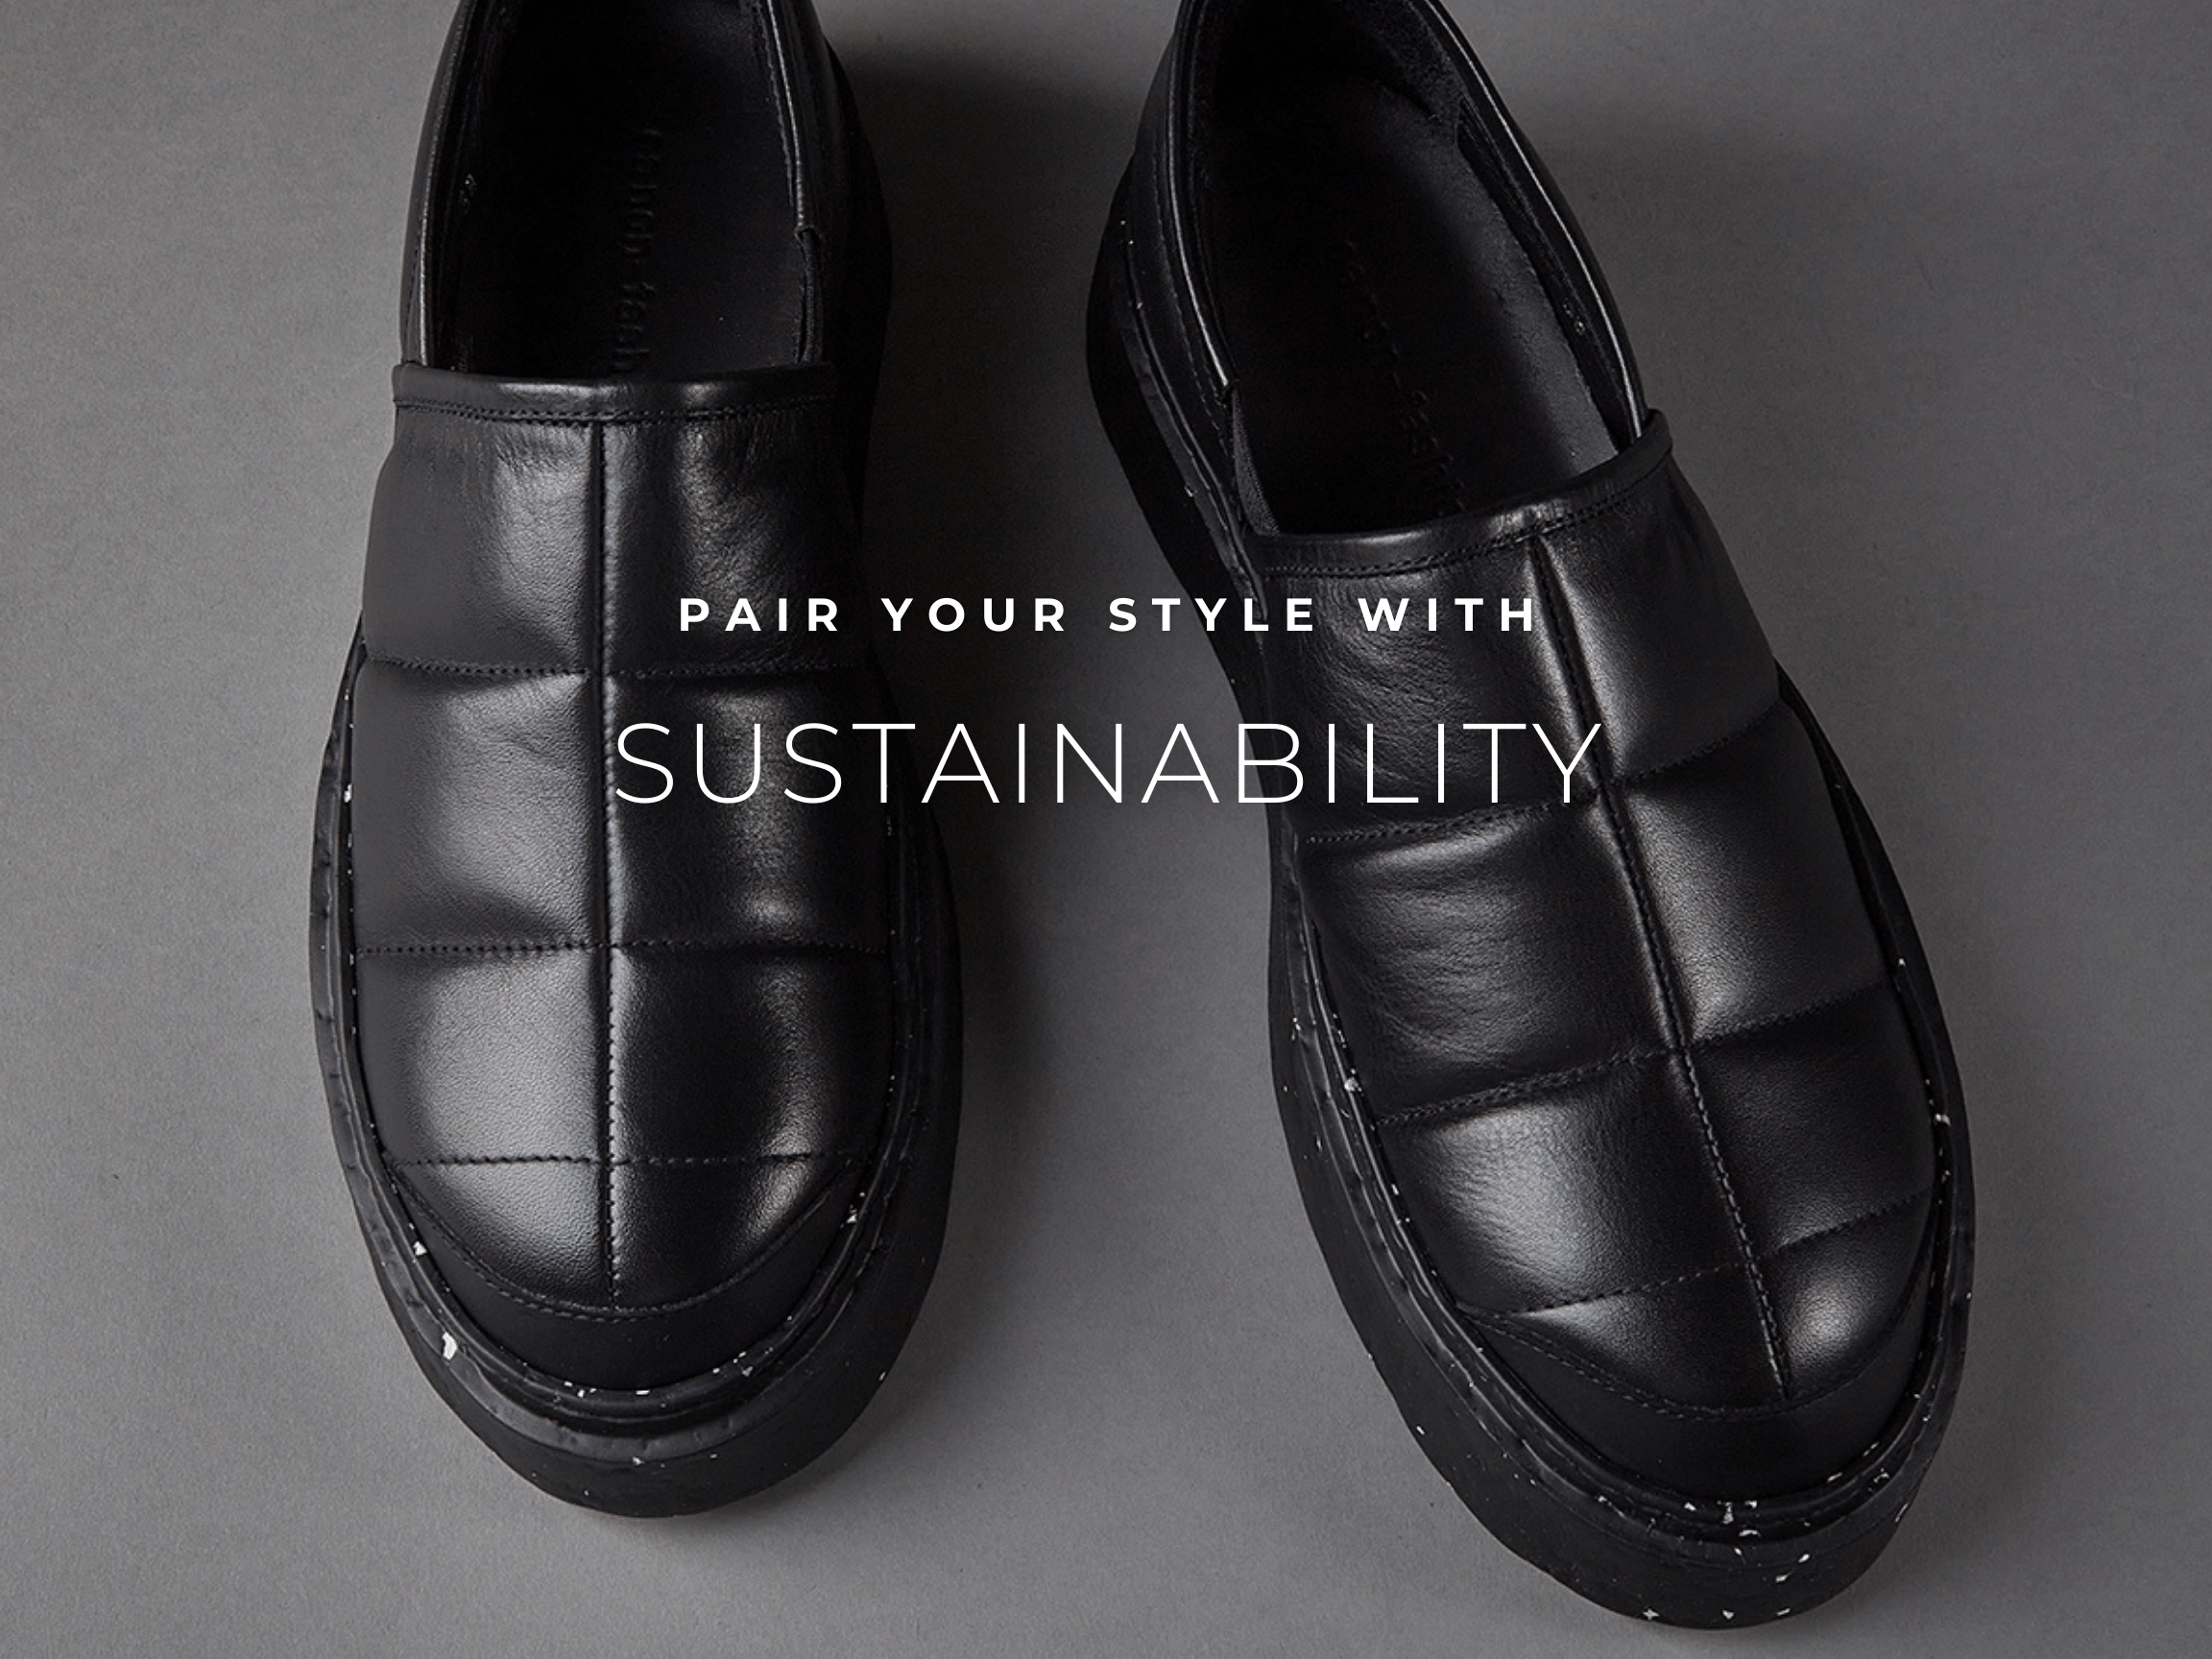 Pair Your Style With Sustainability